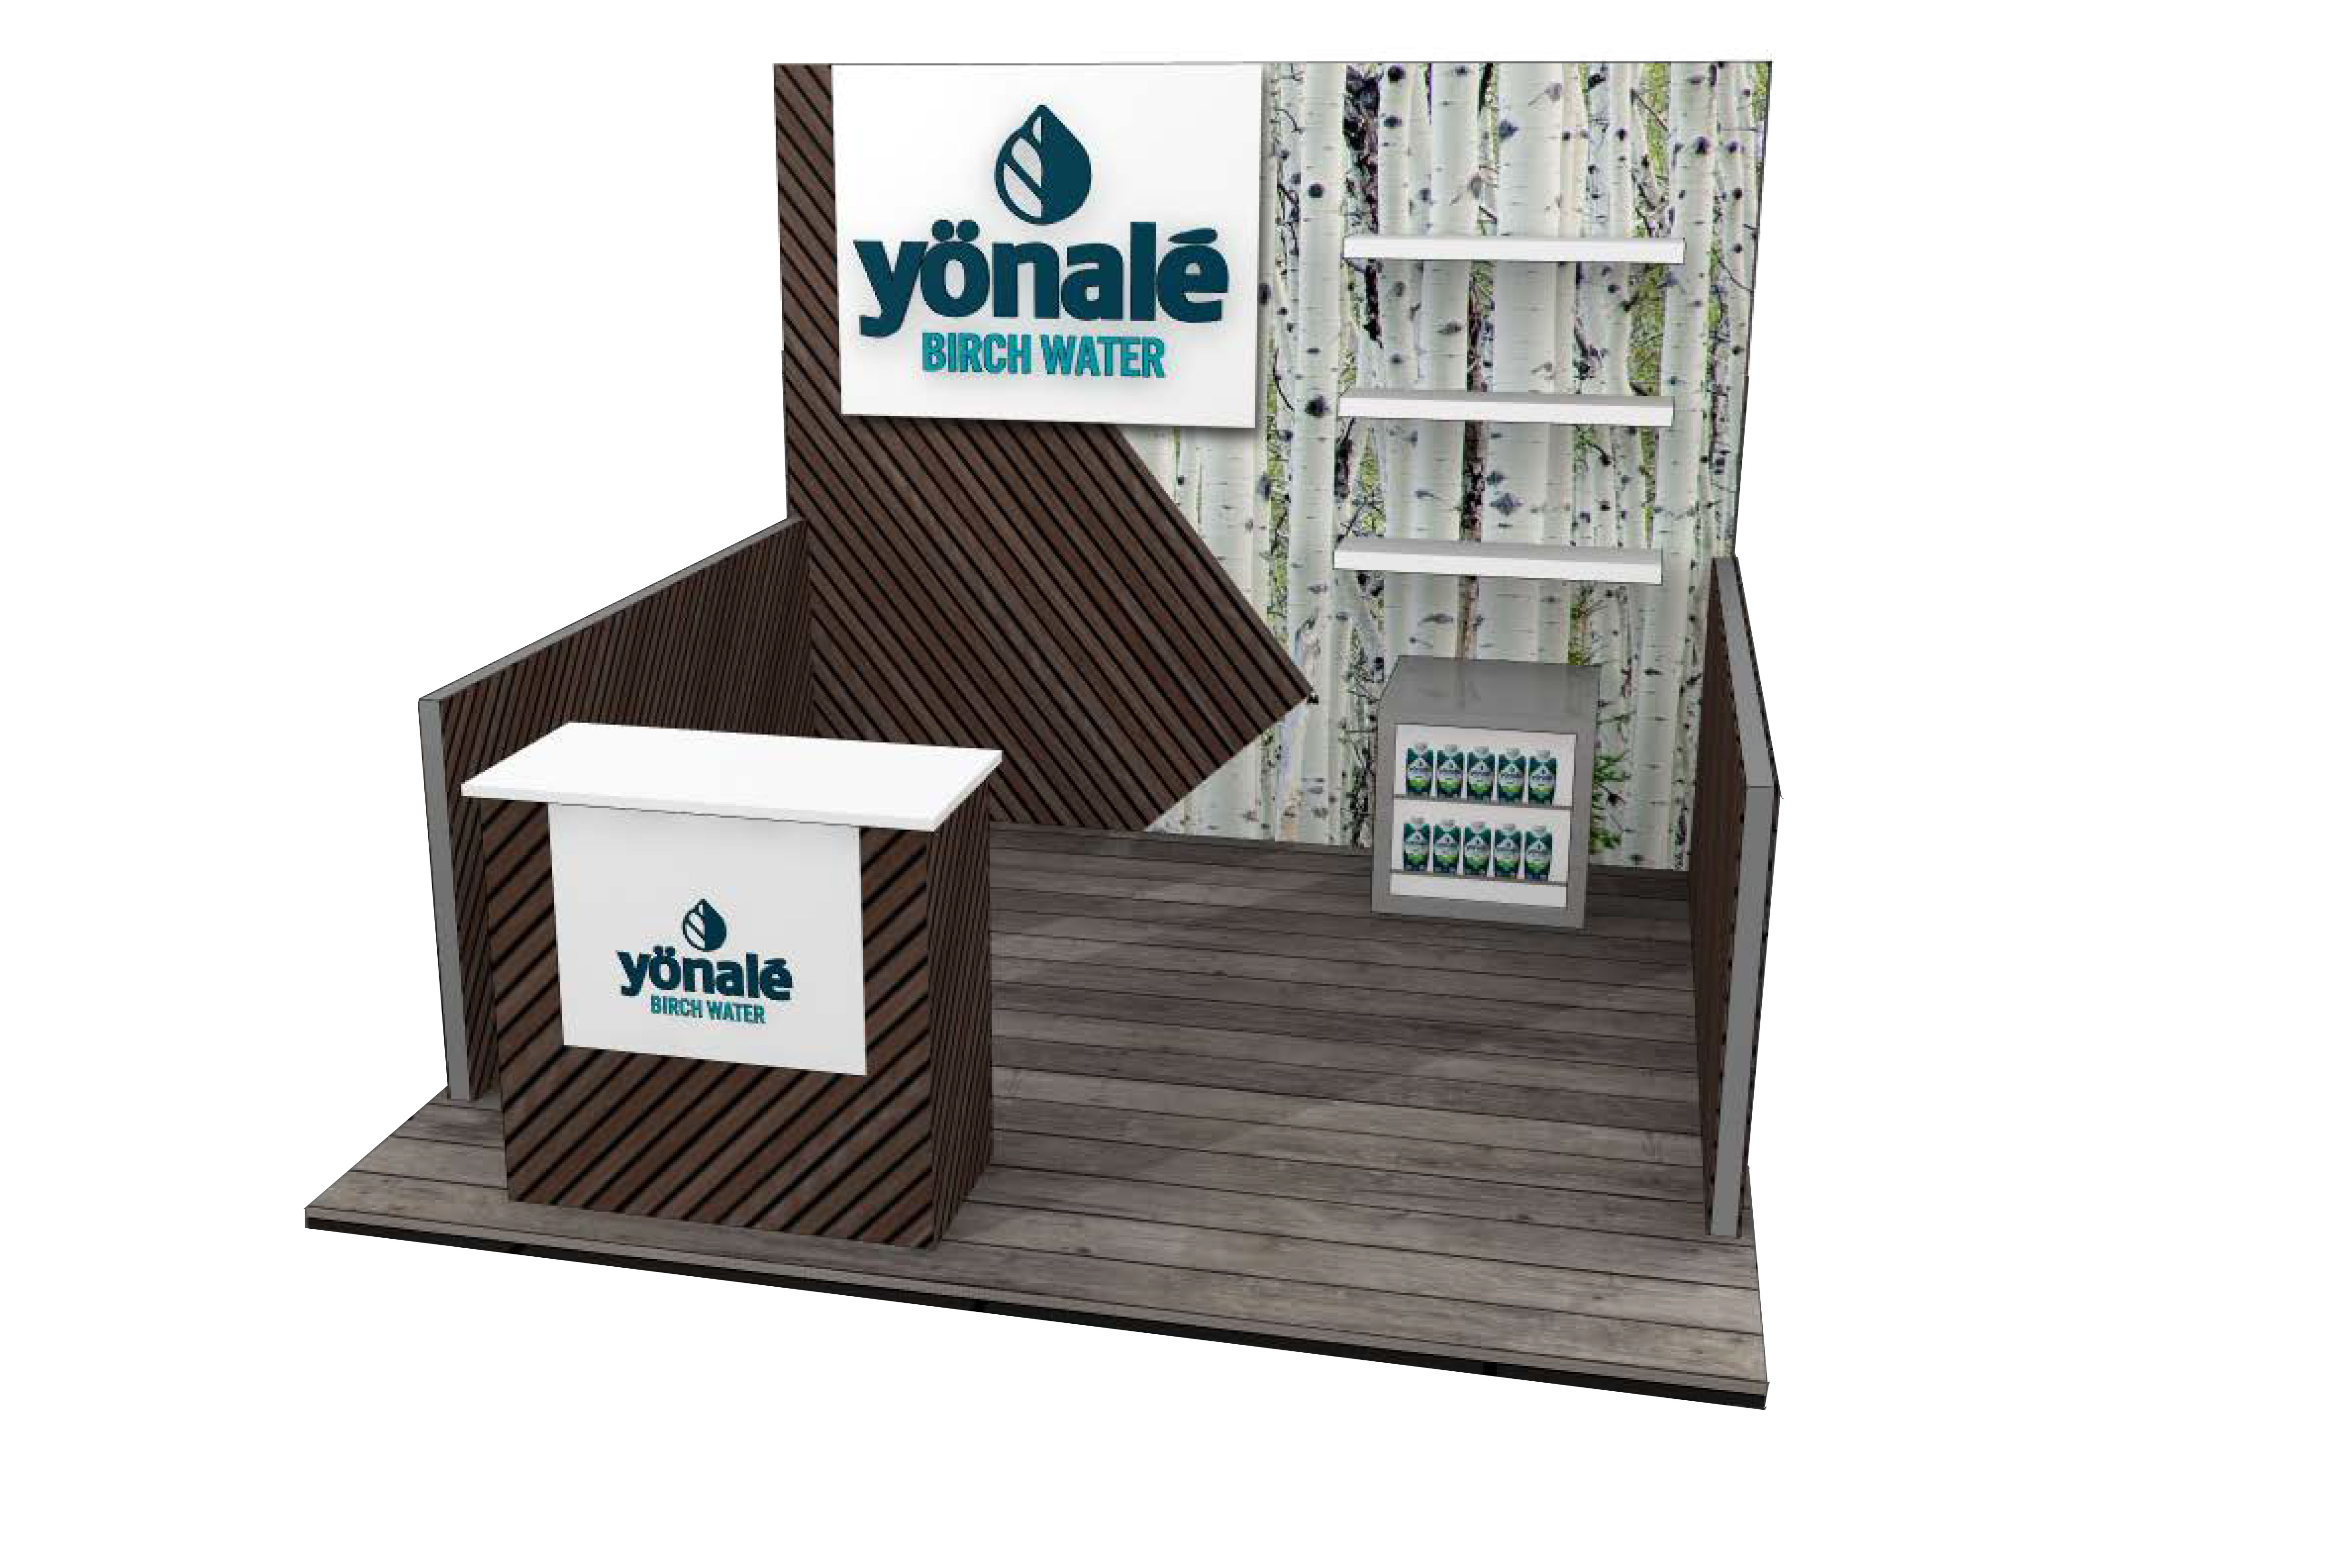 10x10-booth-rental-yonale